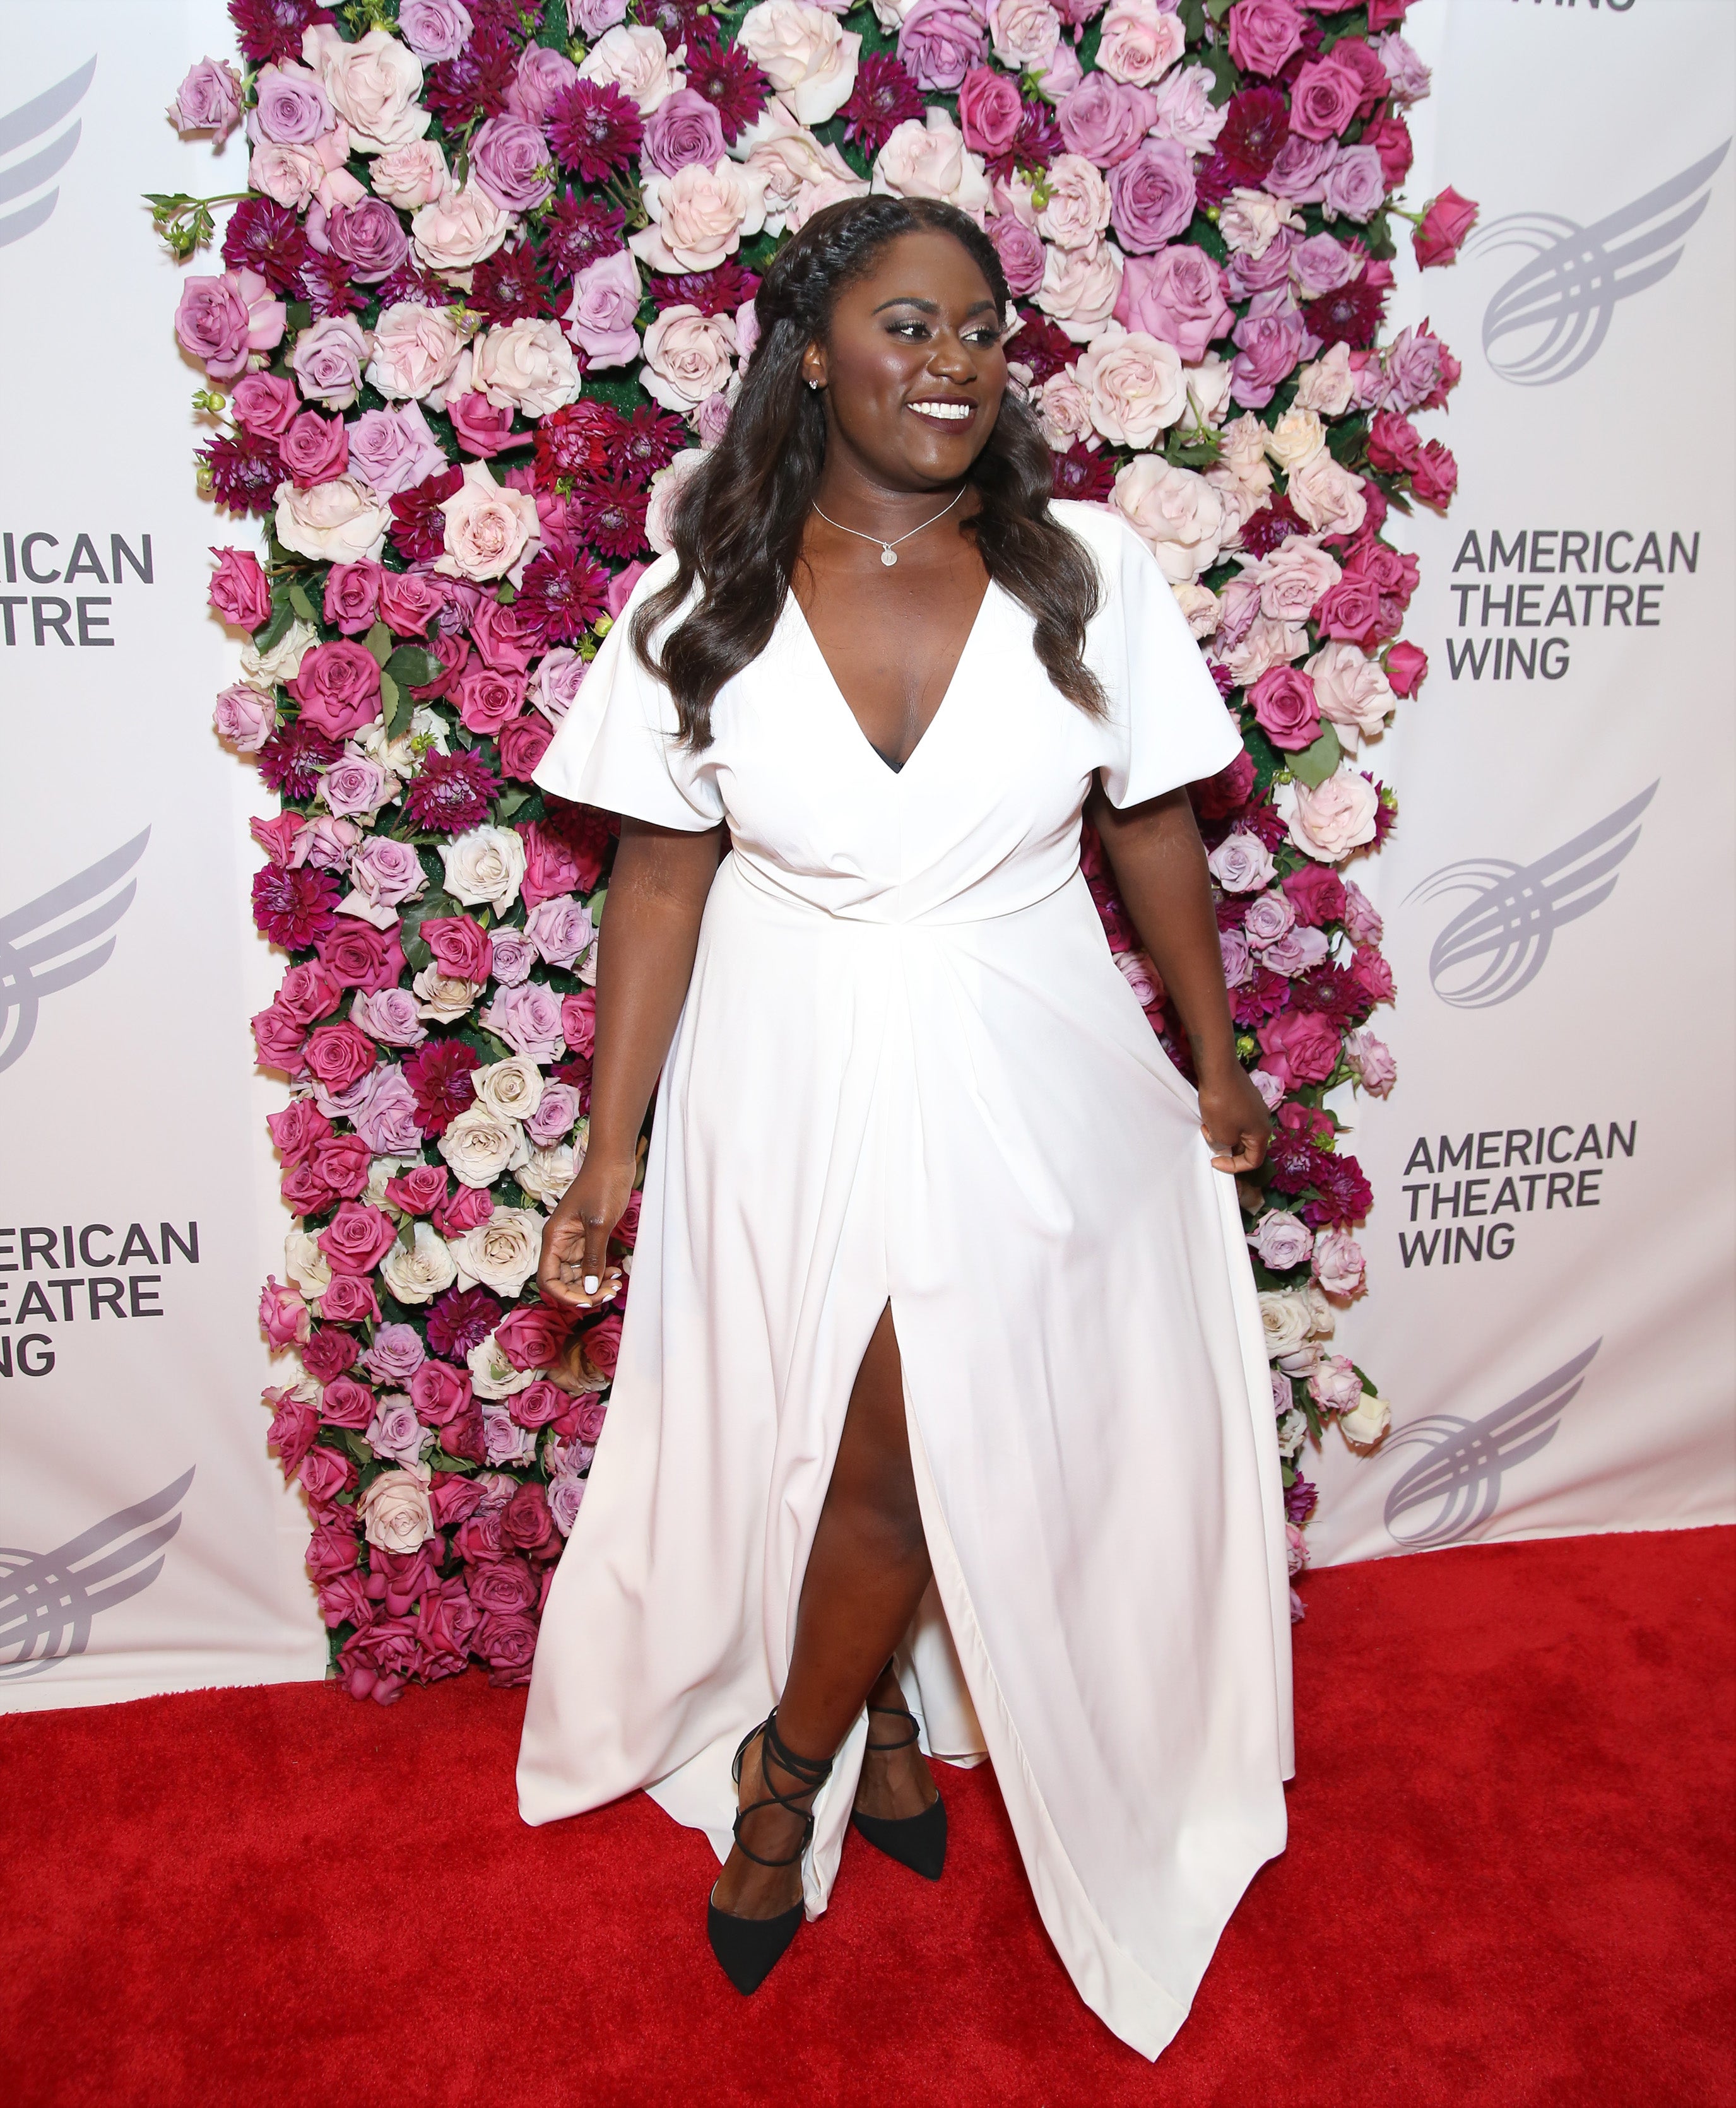 Danielle Brooks is the Curvy Style Maven of the Year
